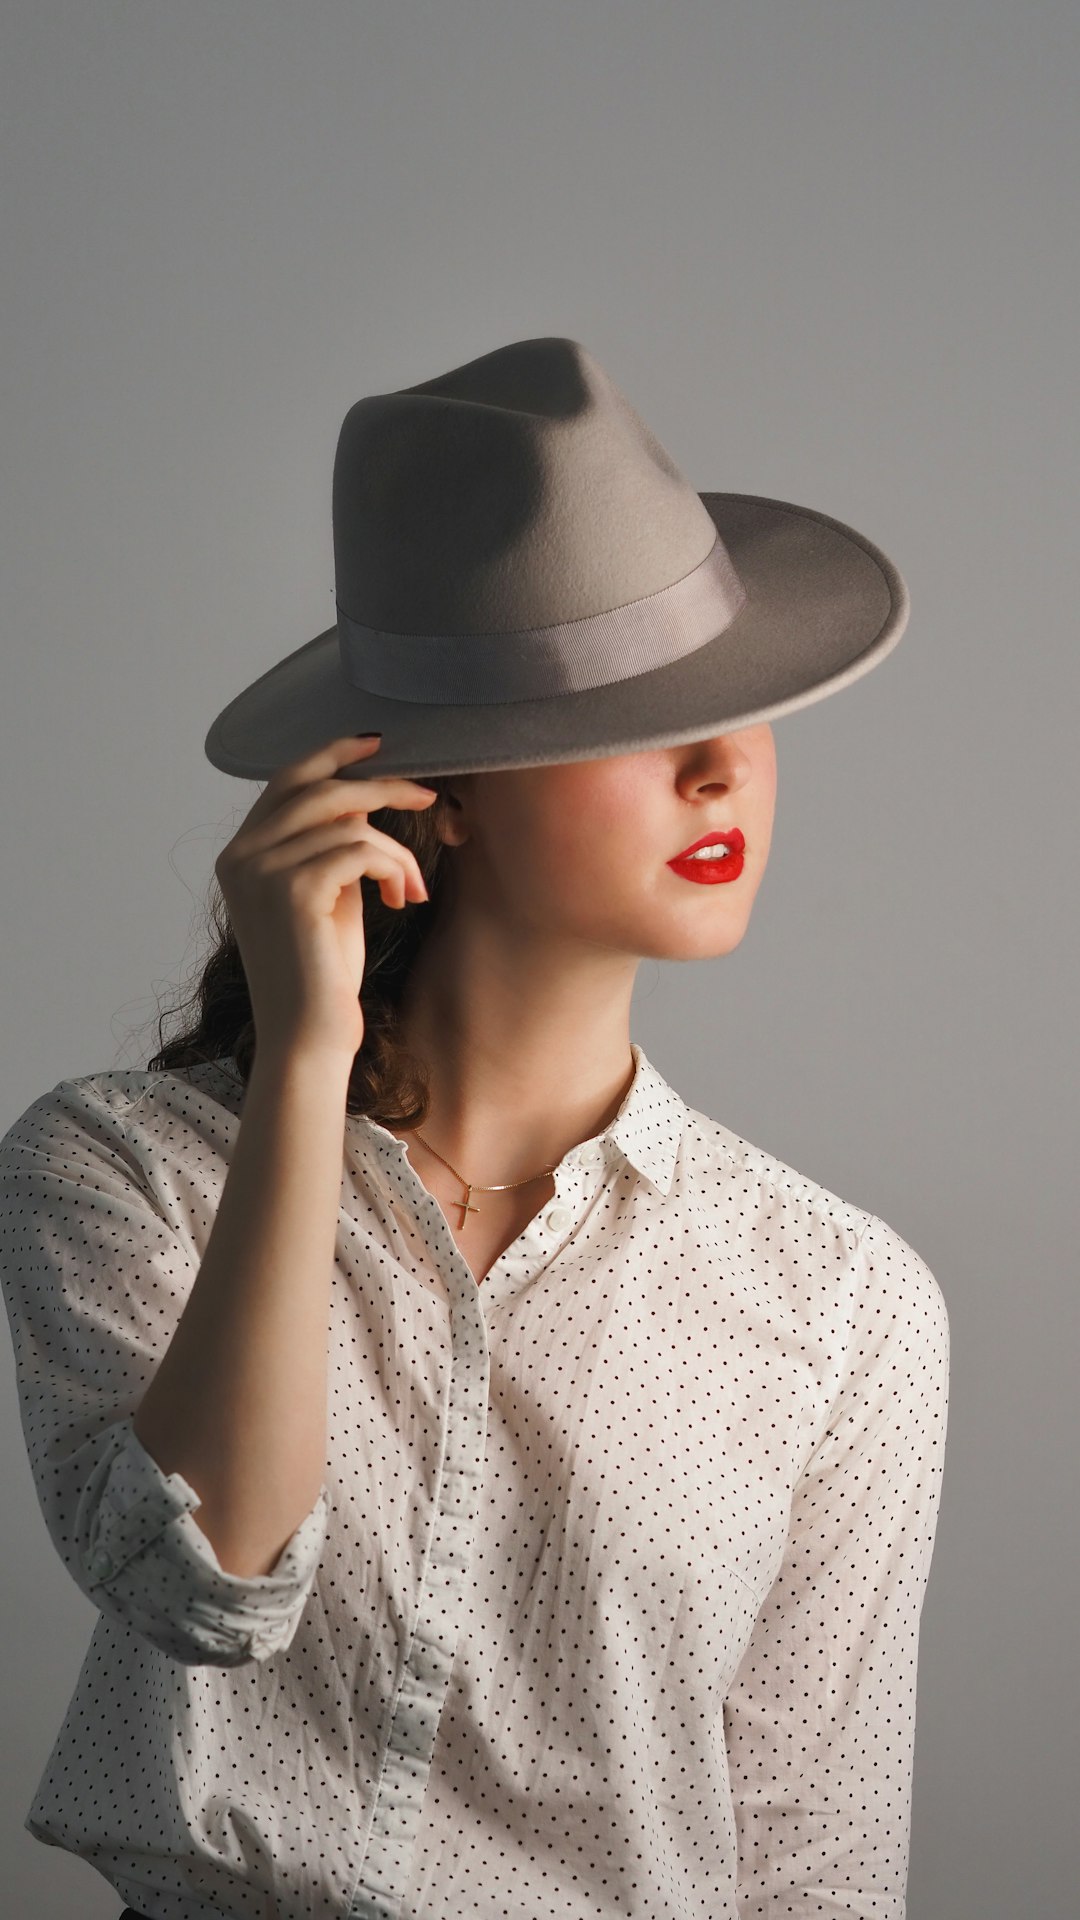 woman in gray hat and gray button up shirt